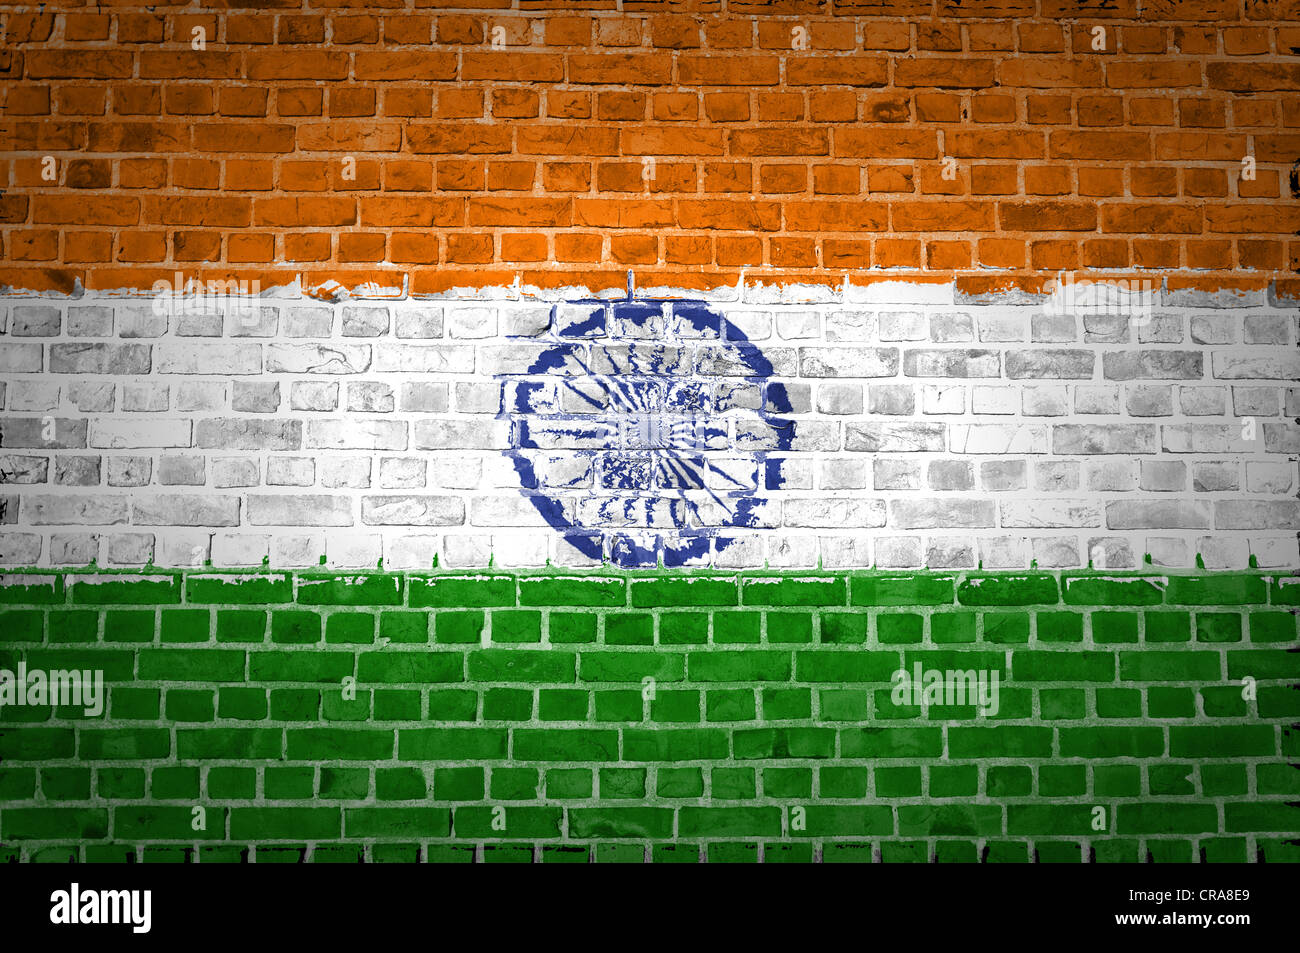 An image of the India flag painted on a brick wall in an urban location Stock Photo